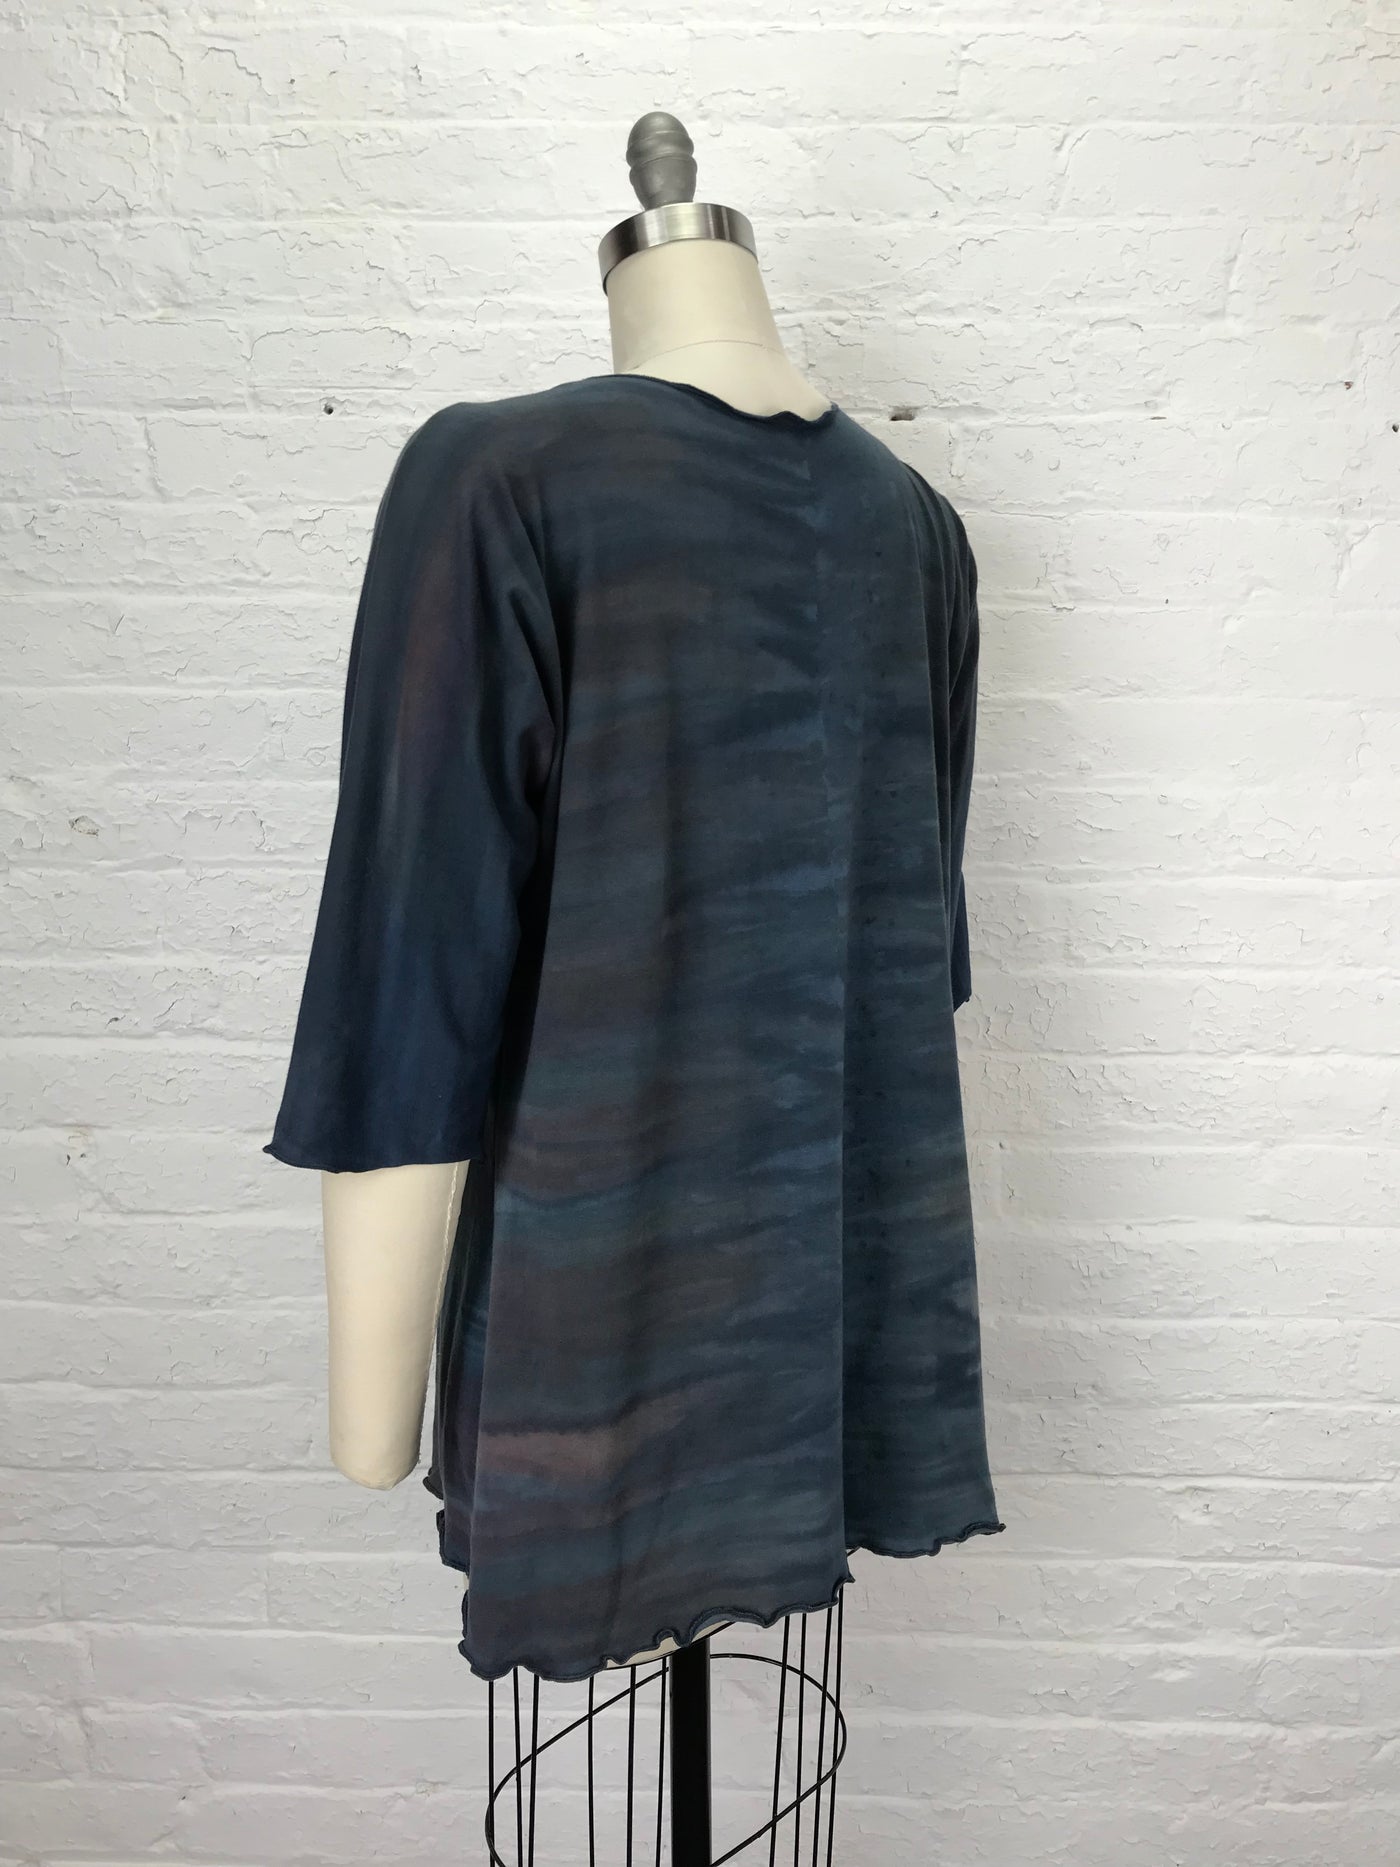 Dolman Tunic in Ink- One size